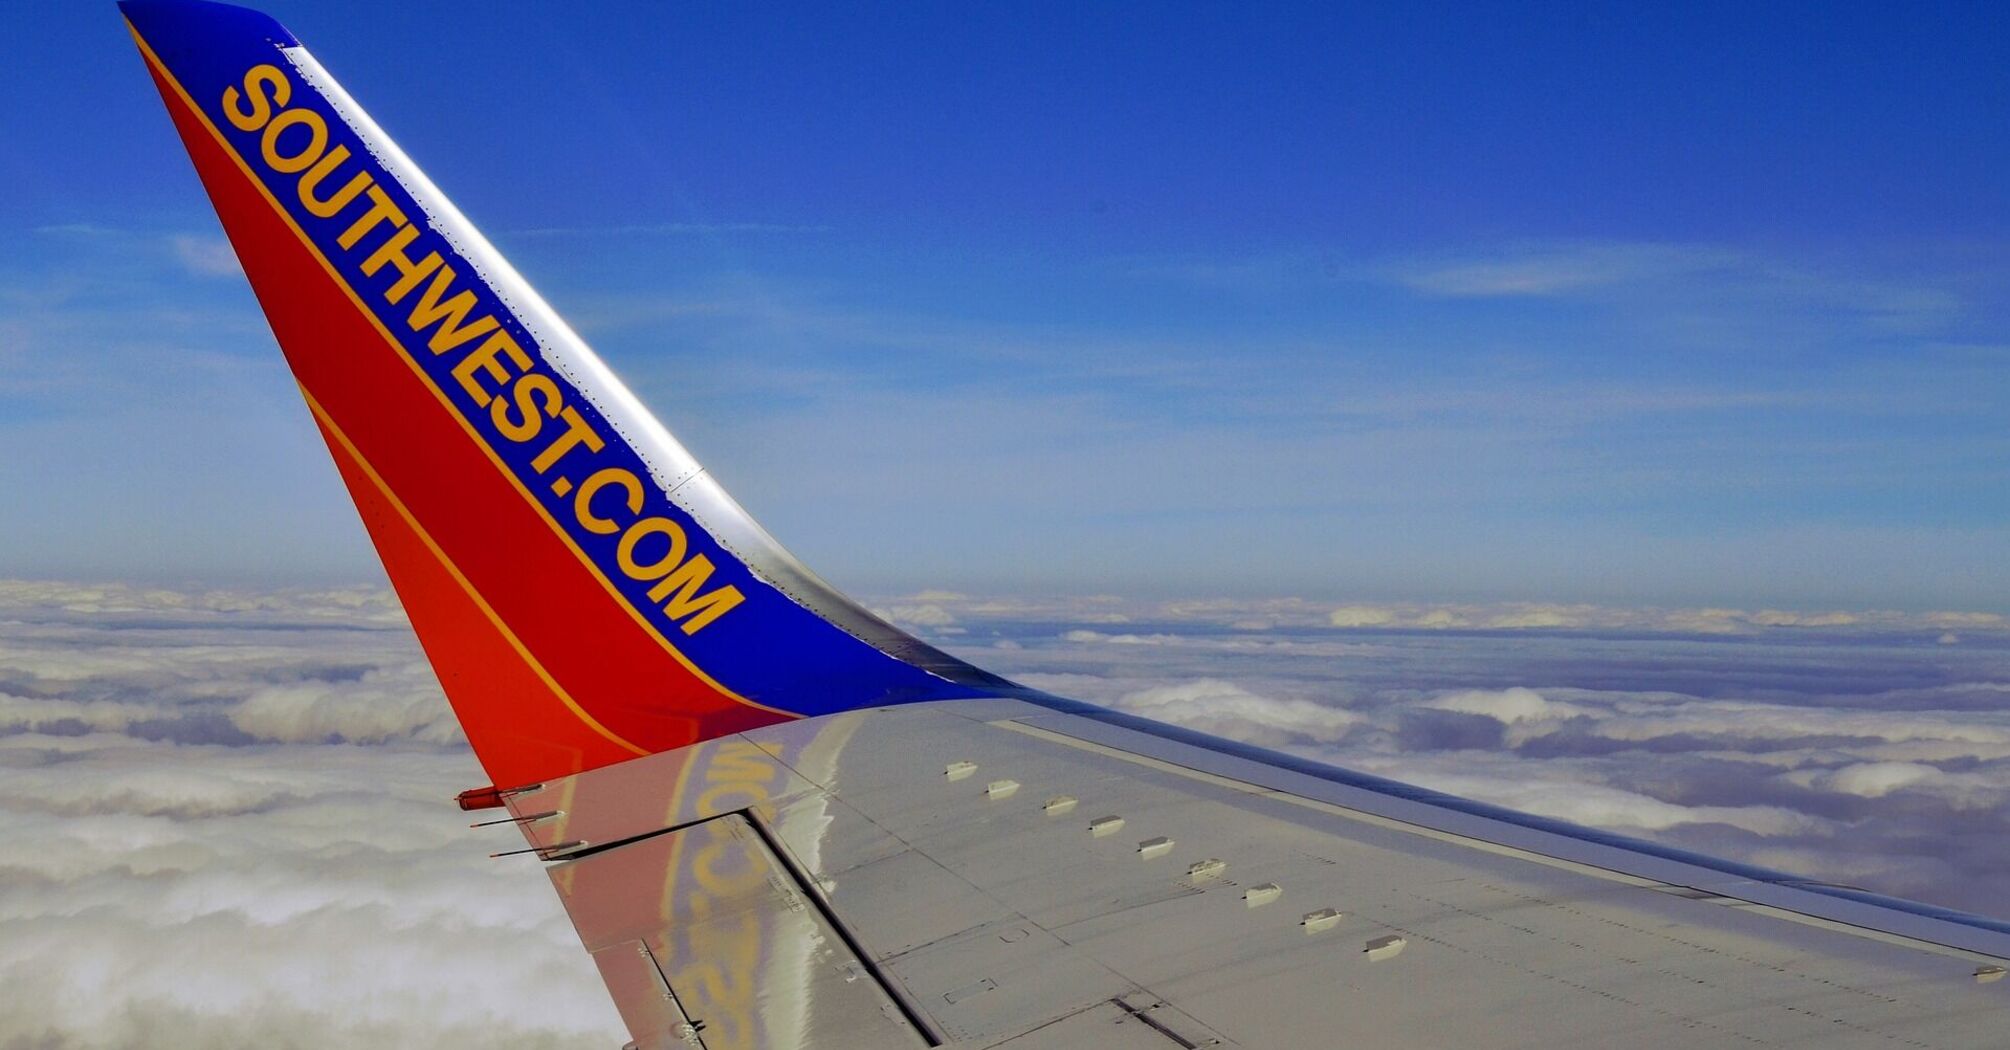 View from a Southwest Airlines airplane window showing wing with logo over clouds